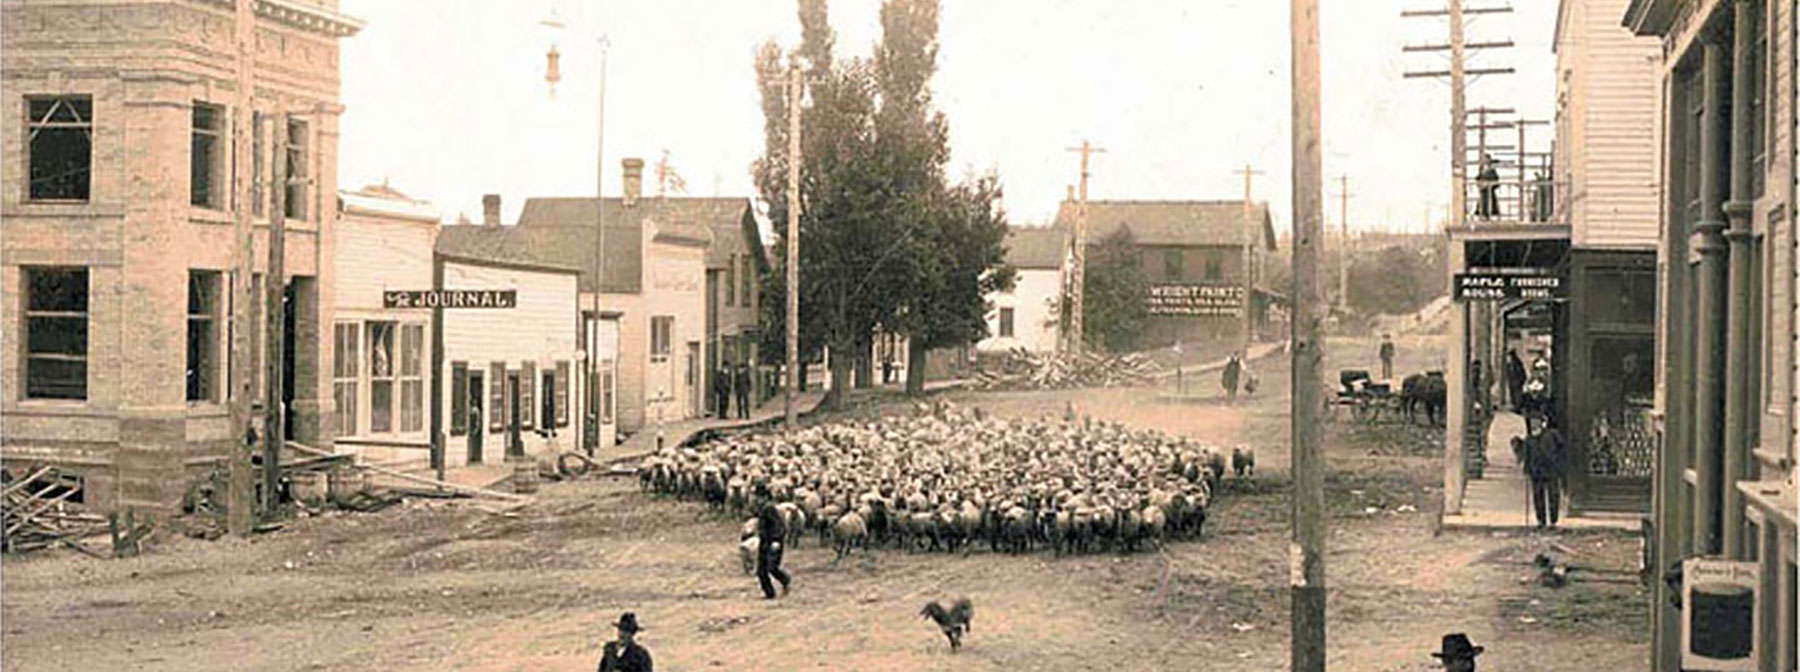 Old Friday Harbor - Moving Sheep in front of CBSJI Building